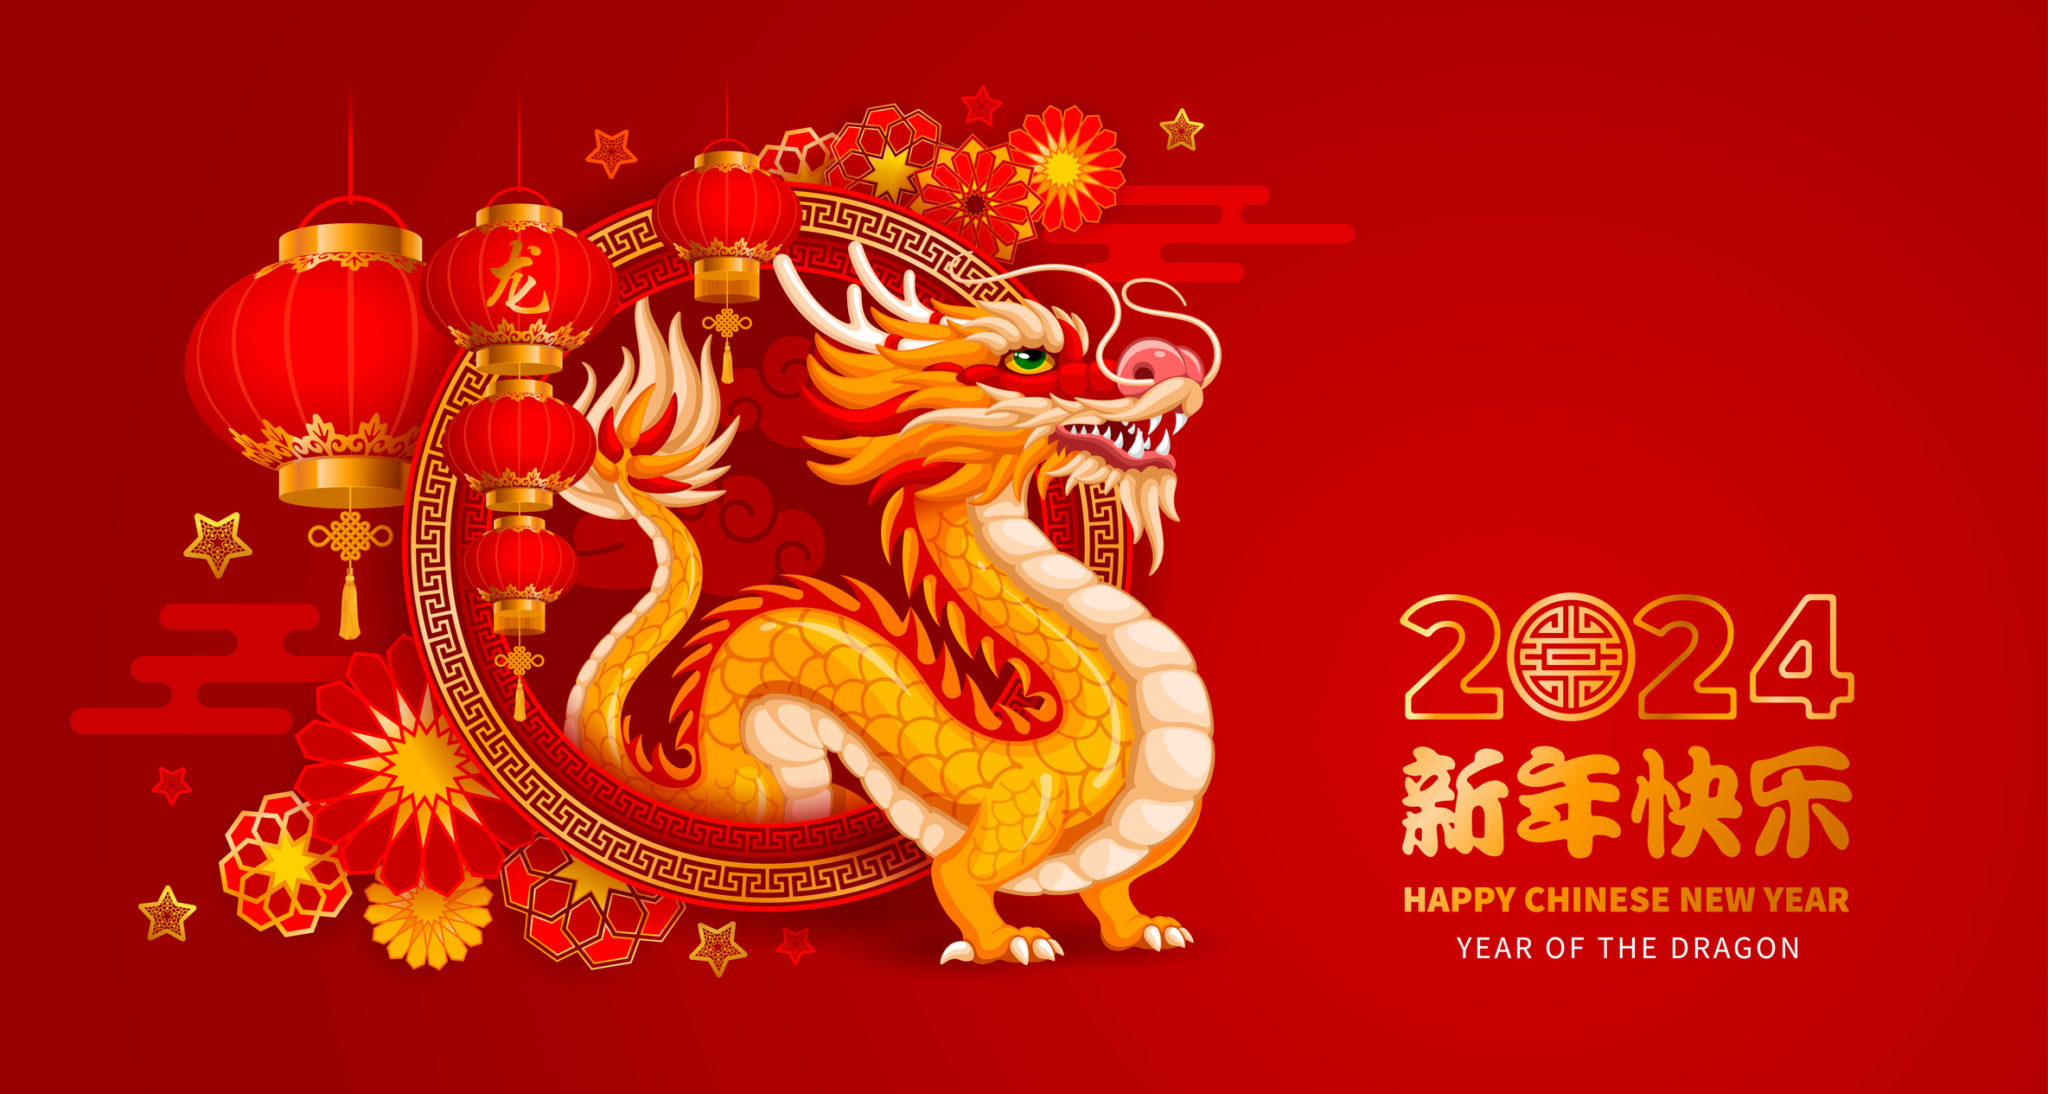 Greeting card, banner for Chinese New Year 2024. Cartoon Dragon, zodiac symbol of 2024 year, decor and text on red background. Translation of hieroglyphs Dragon, Happy New Year. Vector illustration